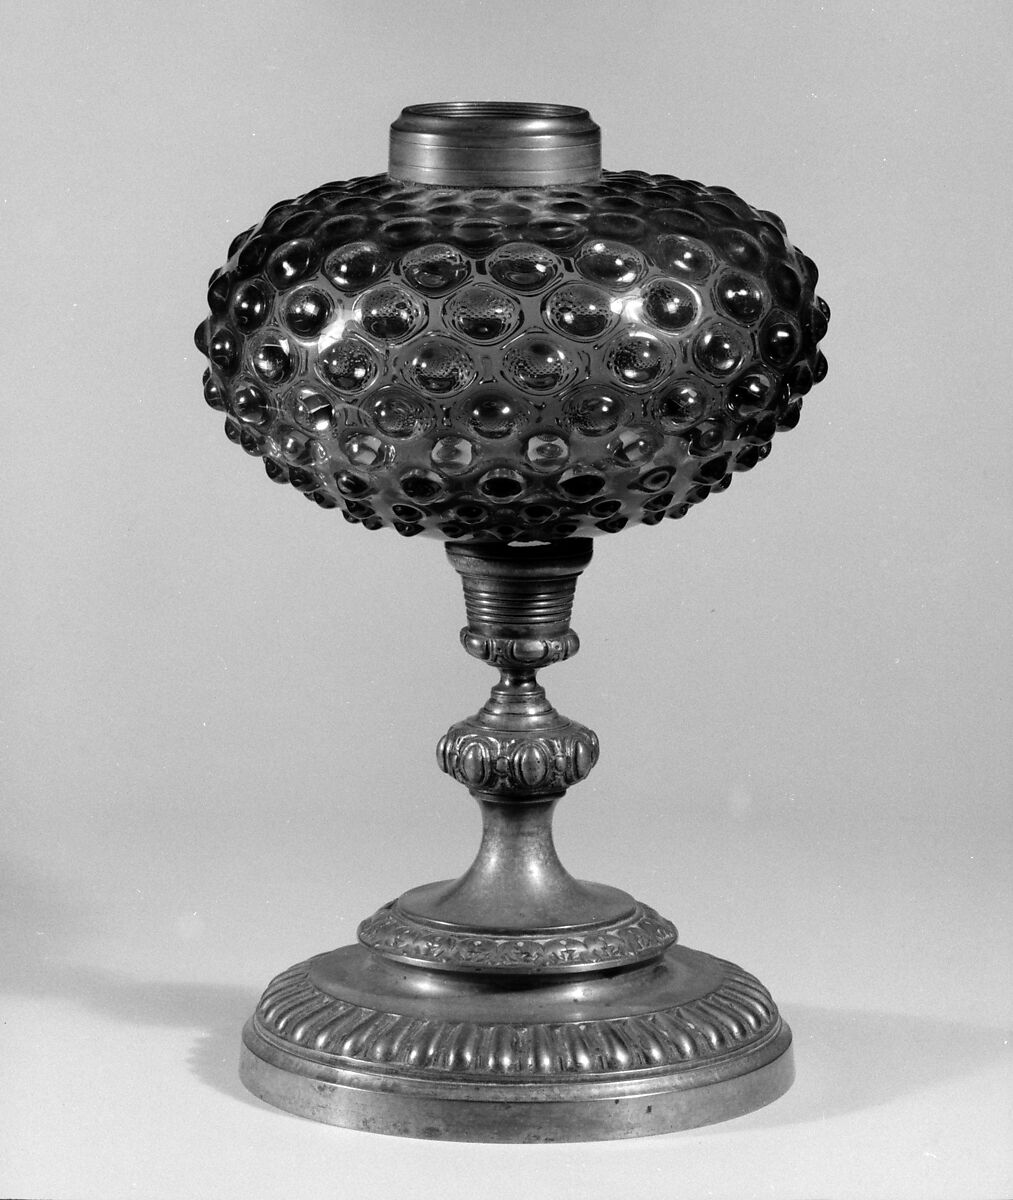 Hobnail Lamp, Probably Hobbs, Brockunier and Company (1863–1891), Pressed glass, American 